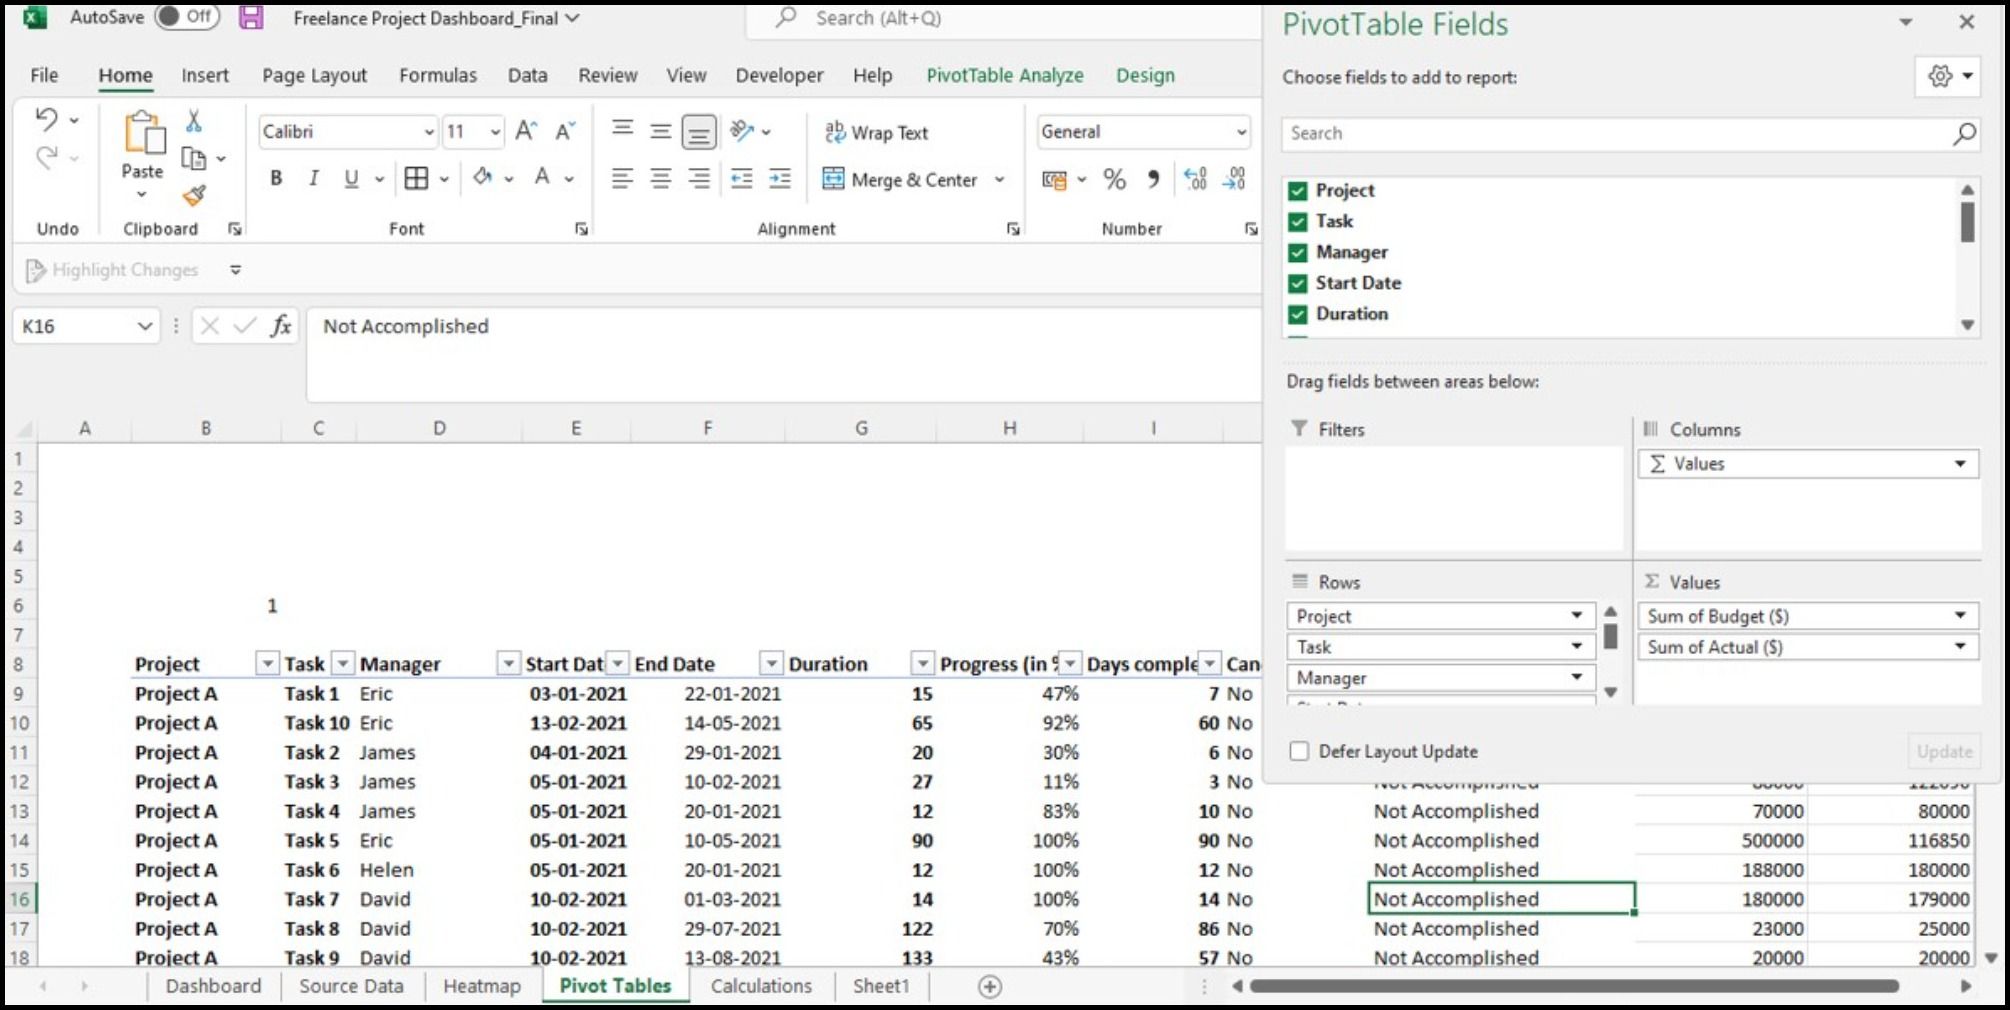 Arranging data in pivot tables